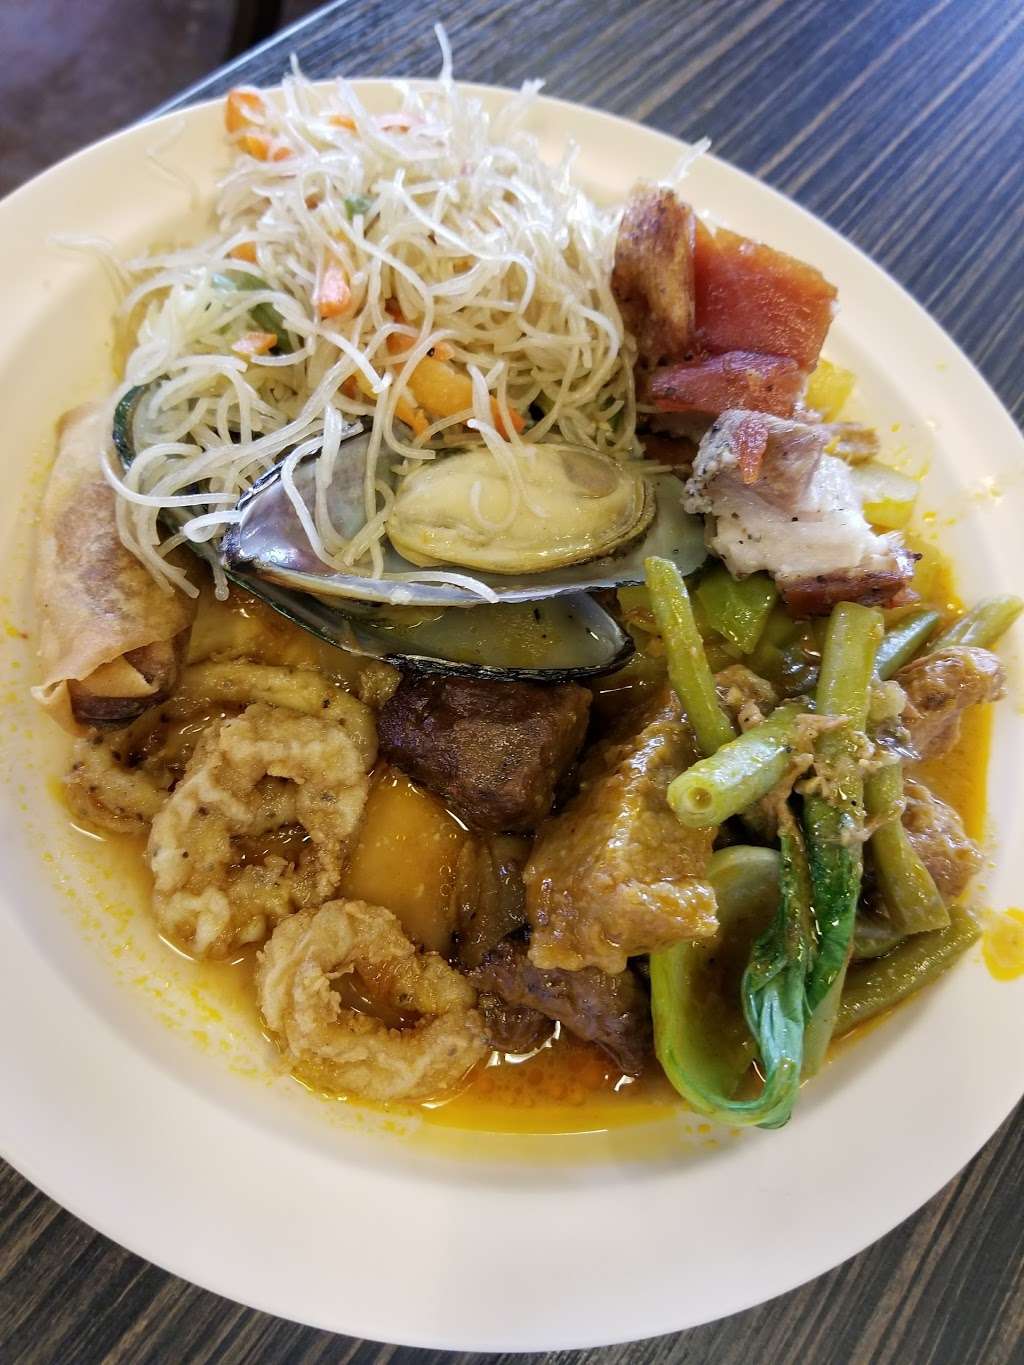 TJ Filipino Cuisine | 1826 Country Pl Pkwy #102, Pearland, TX 77584 | Phone: (713) 436-5030